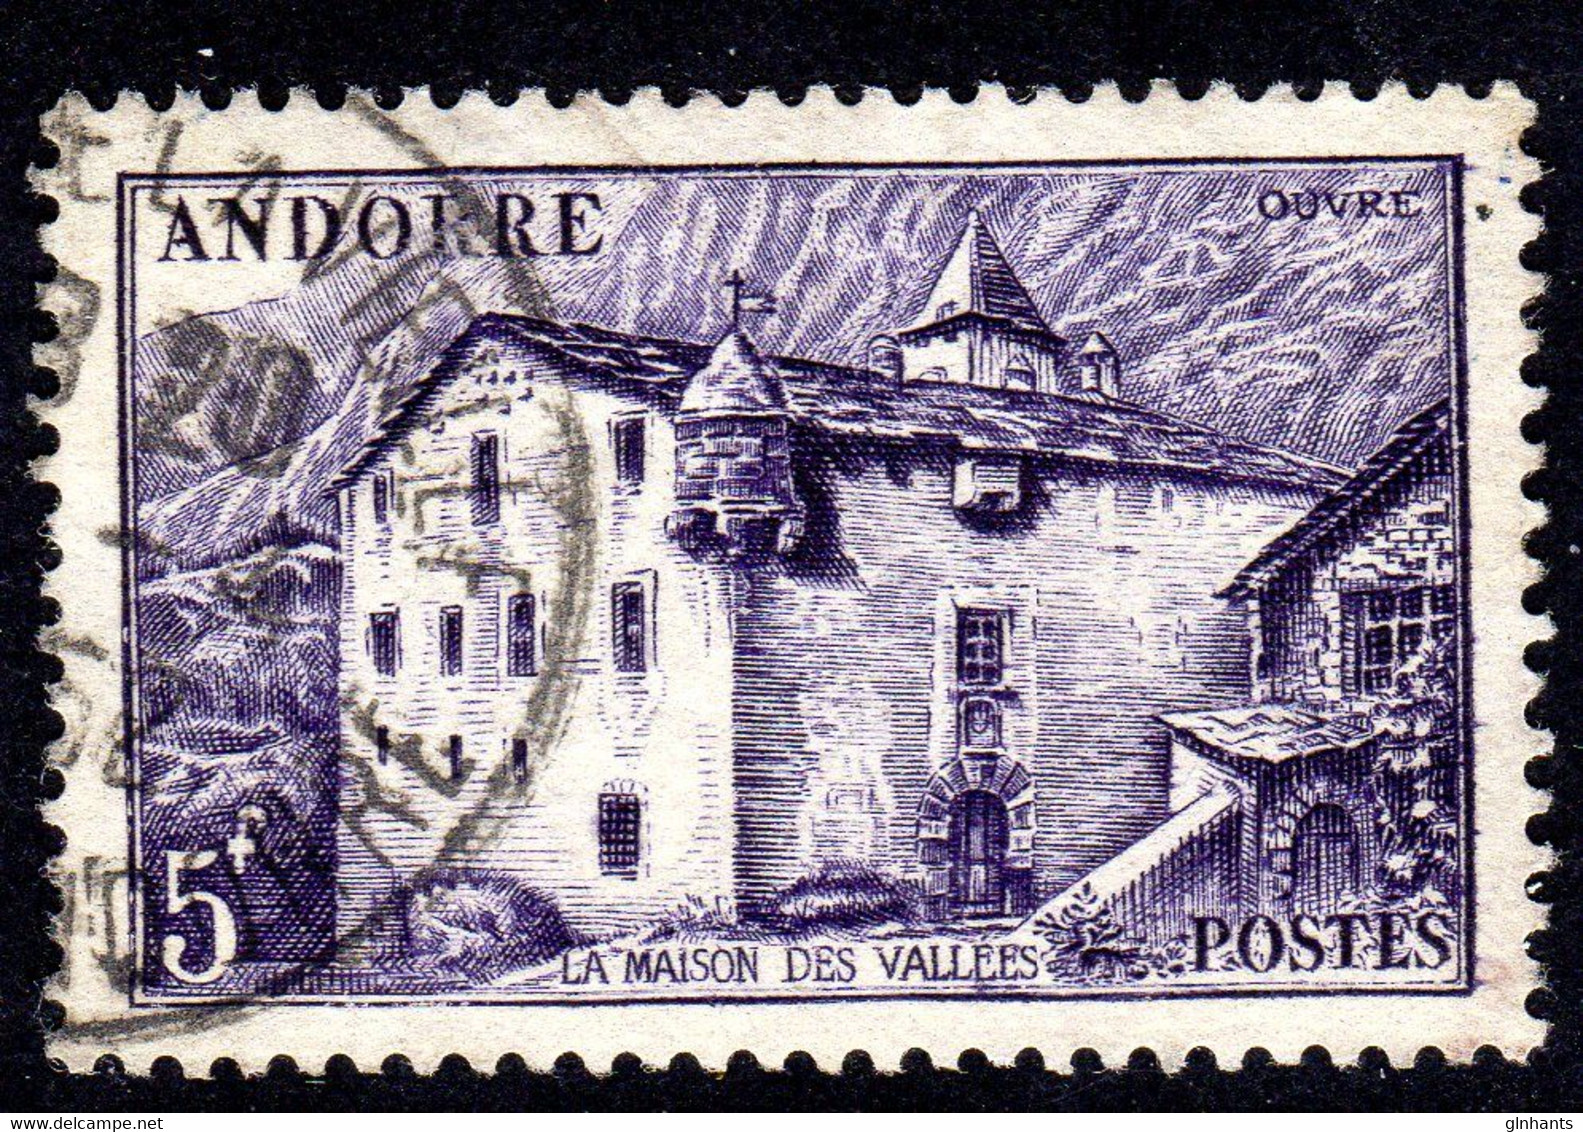 FRENCH ANDORRA - 1951 DEFINITIVE 5F STAMP FINE USED SG F121 - Used Stamps